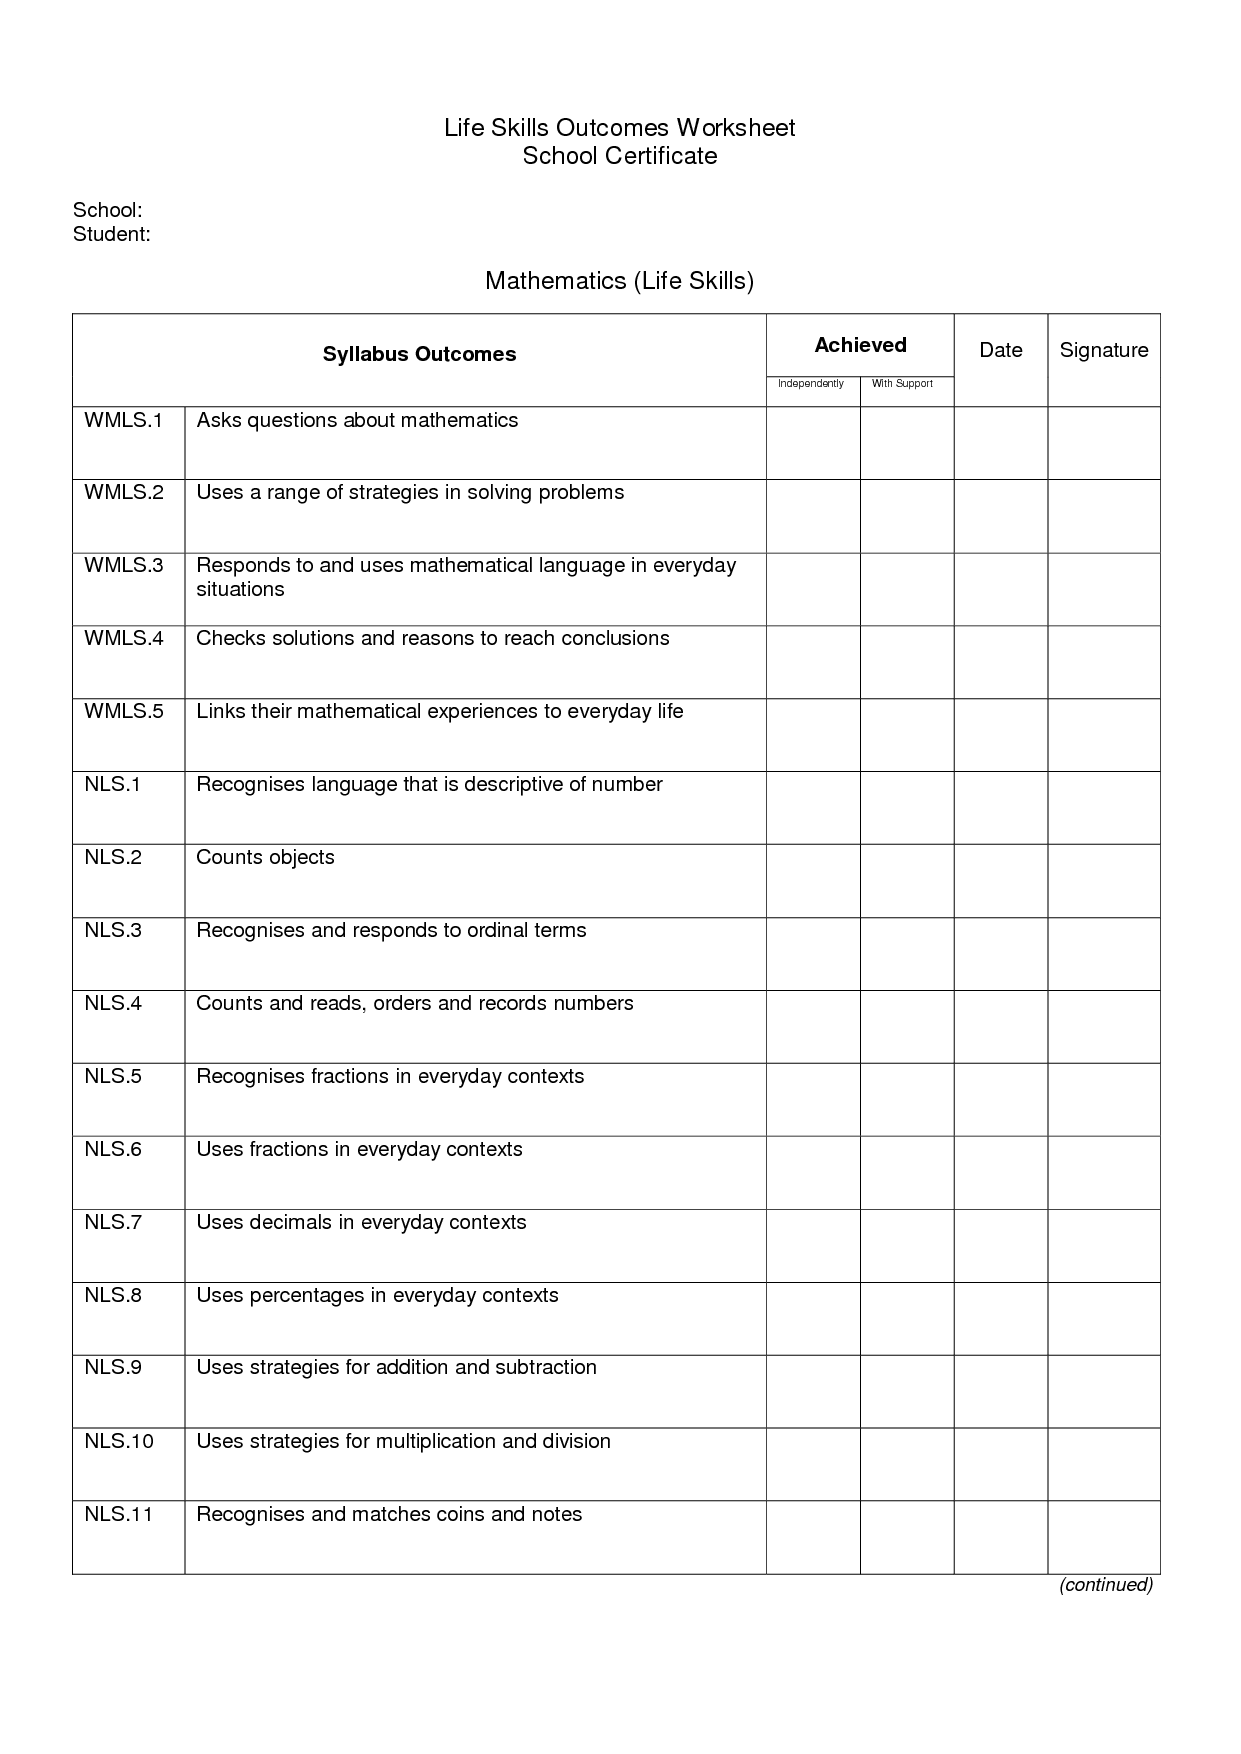 12 Best Images of Career Worksheets For Adults Jobs and Occupation